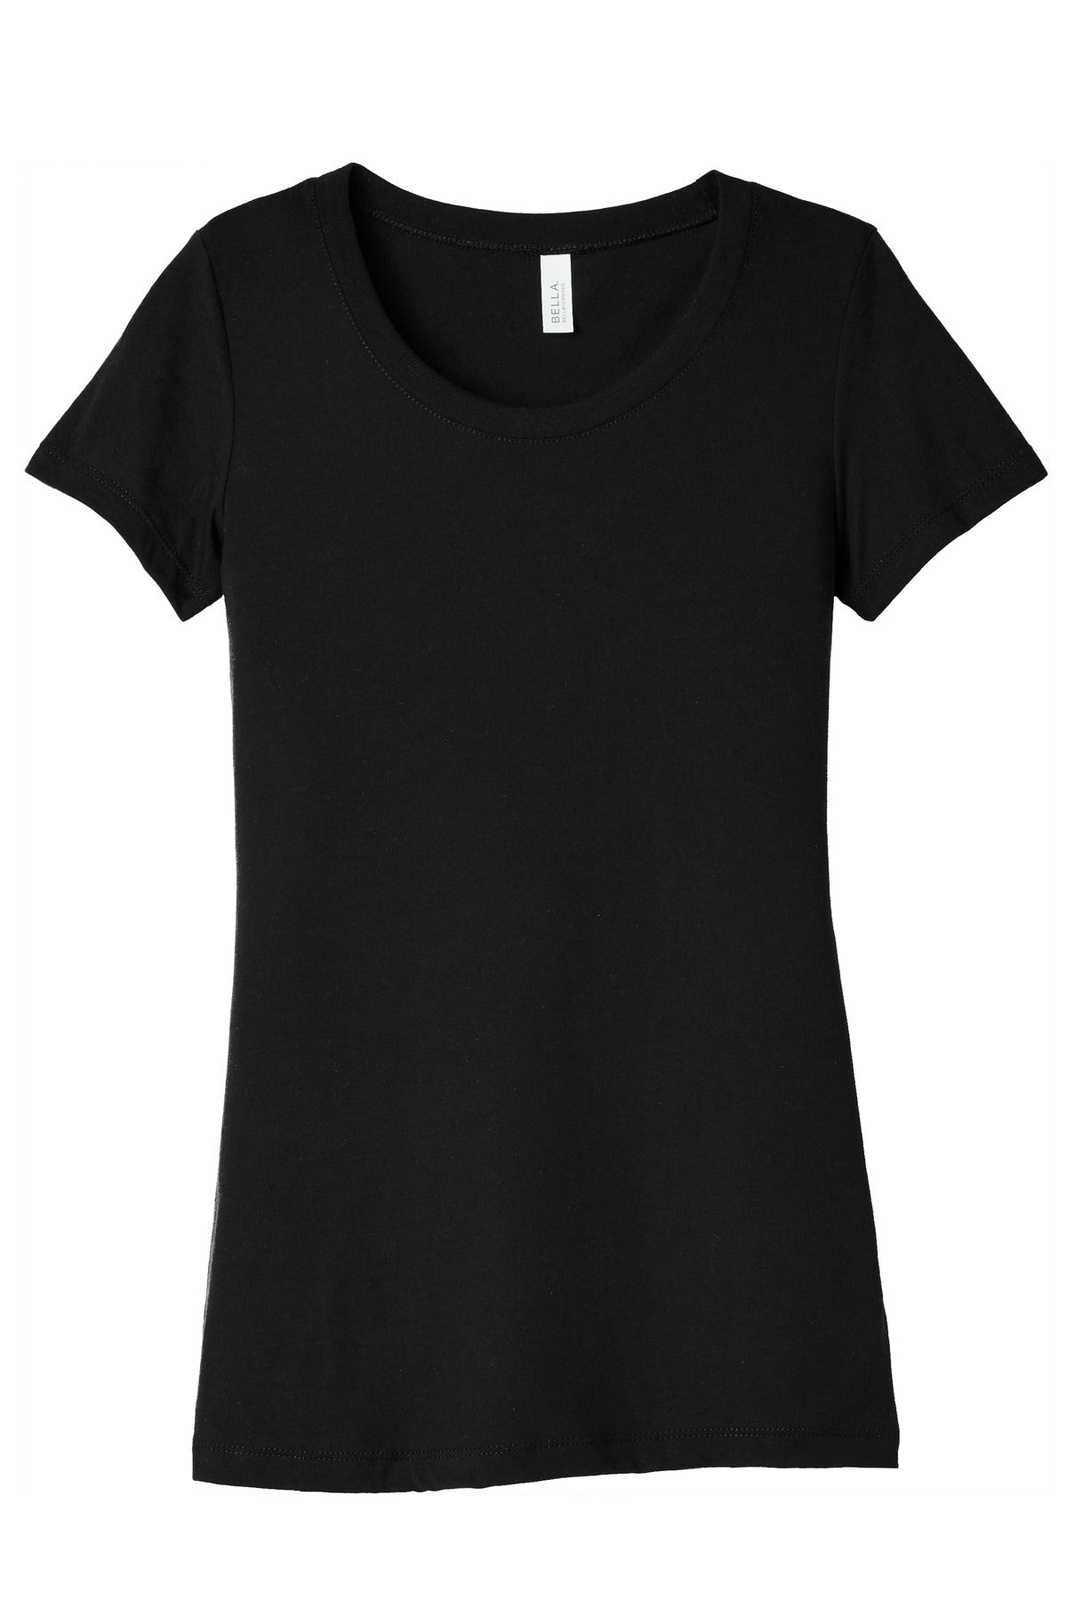 Bella + Canvas 8413 Women's Triblend Short Sleeve Tee - Solid Black Triblend - HIT a Double